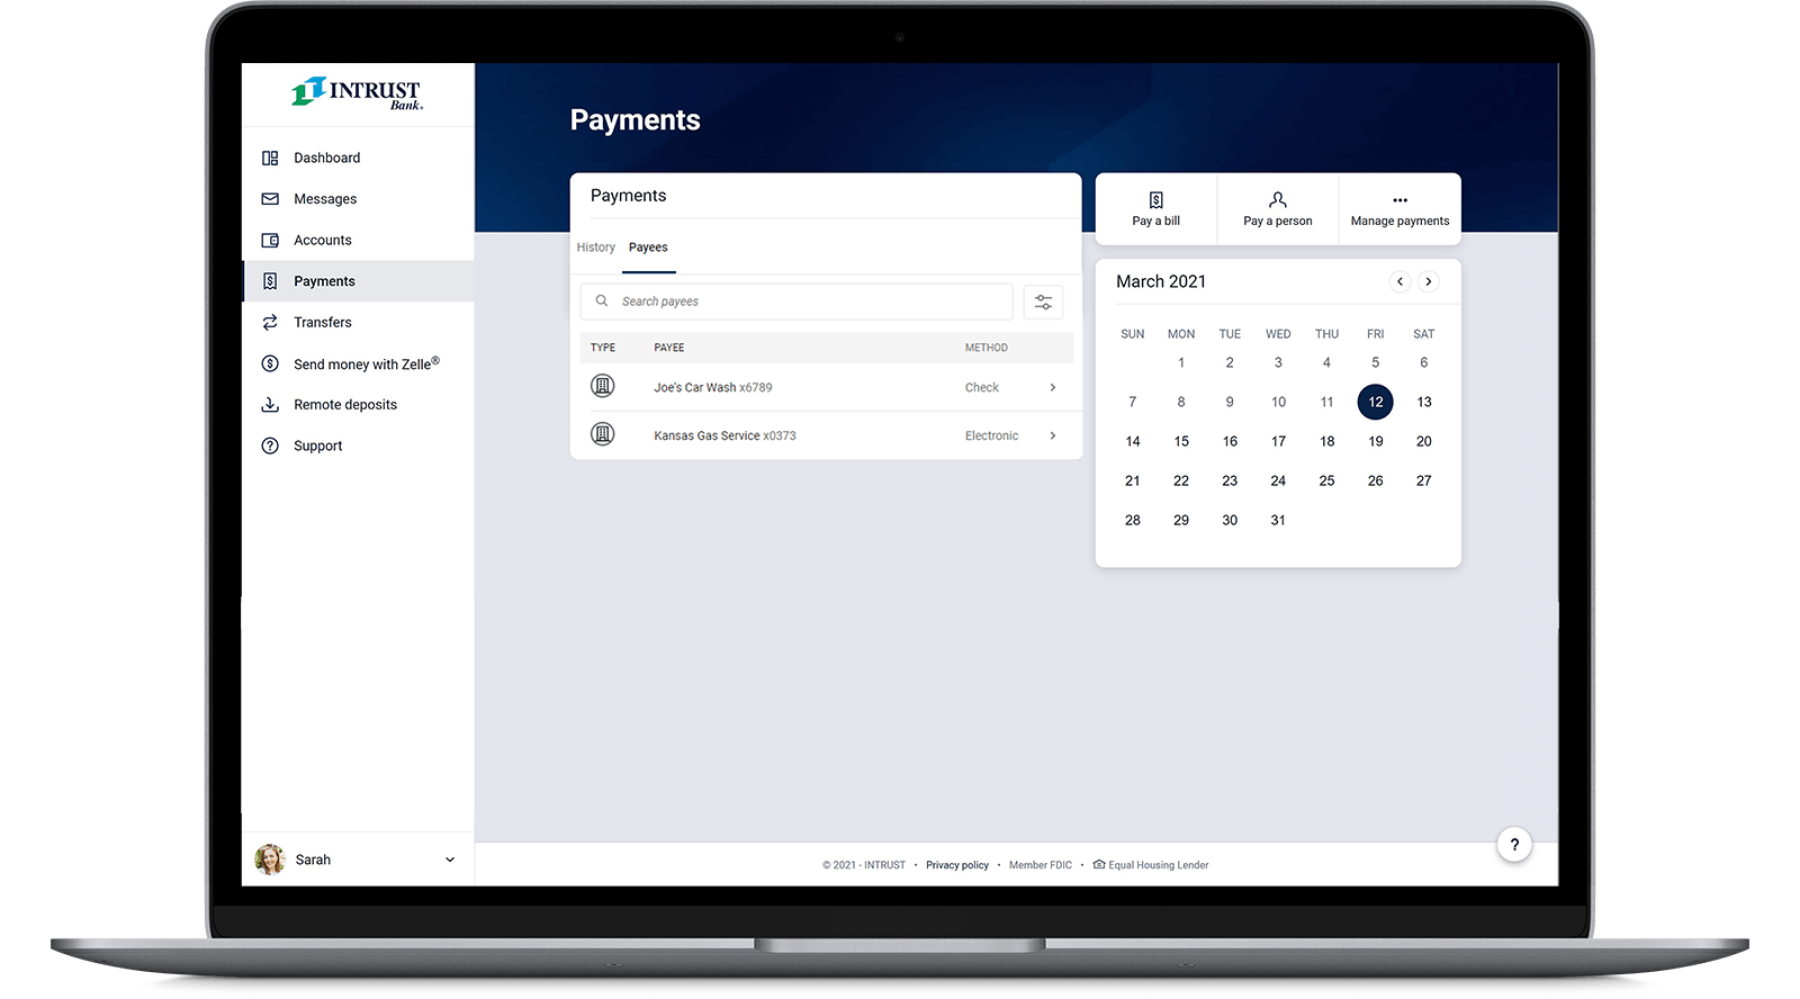 The Payments screen of INTRUST Personal Online Banking presented on a laptop